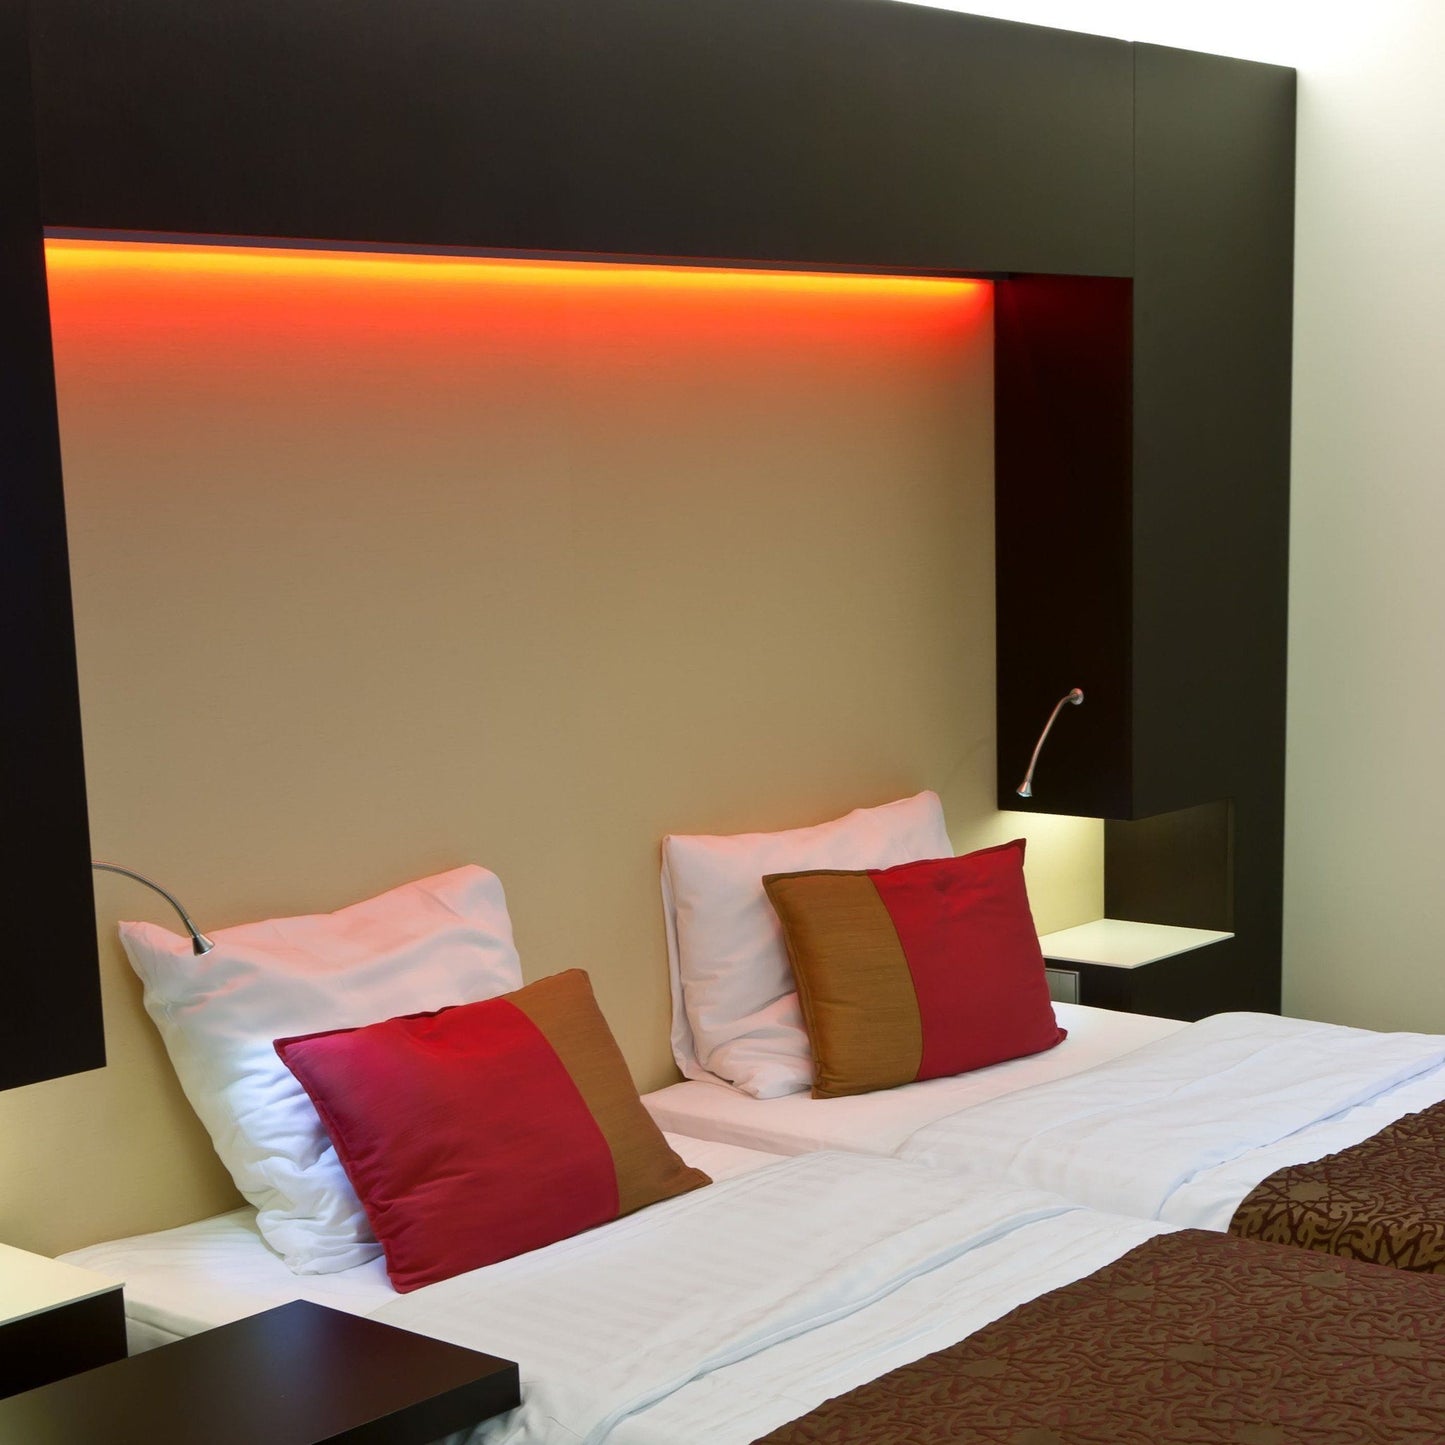 hotel room double beds illuminated by orange strip light installed in modular black wall casing